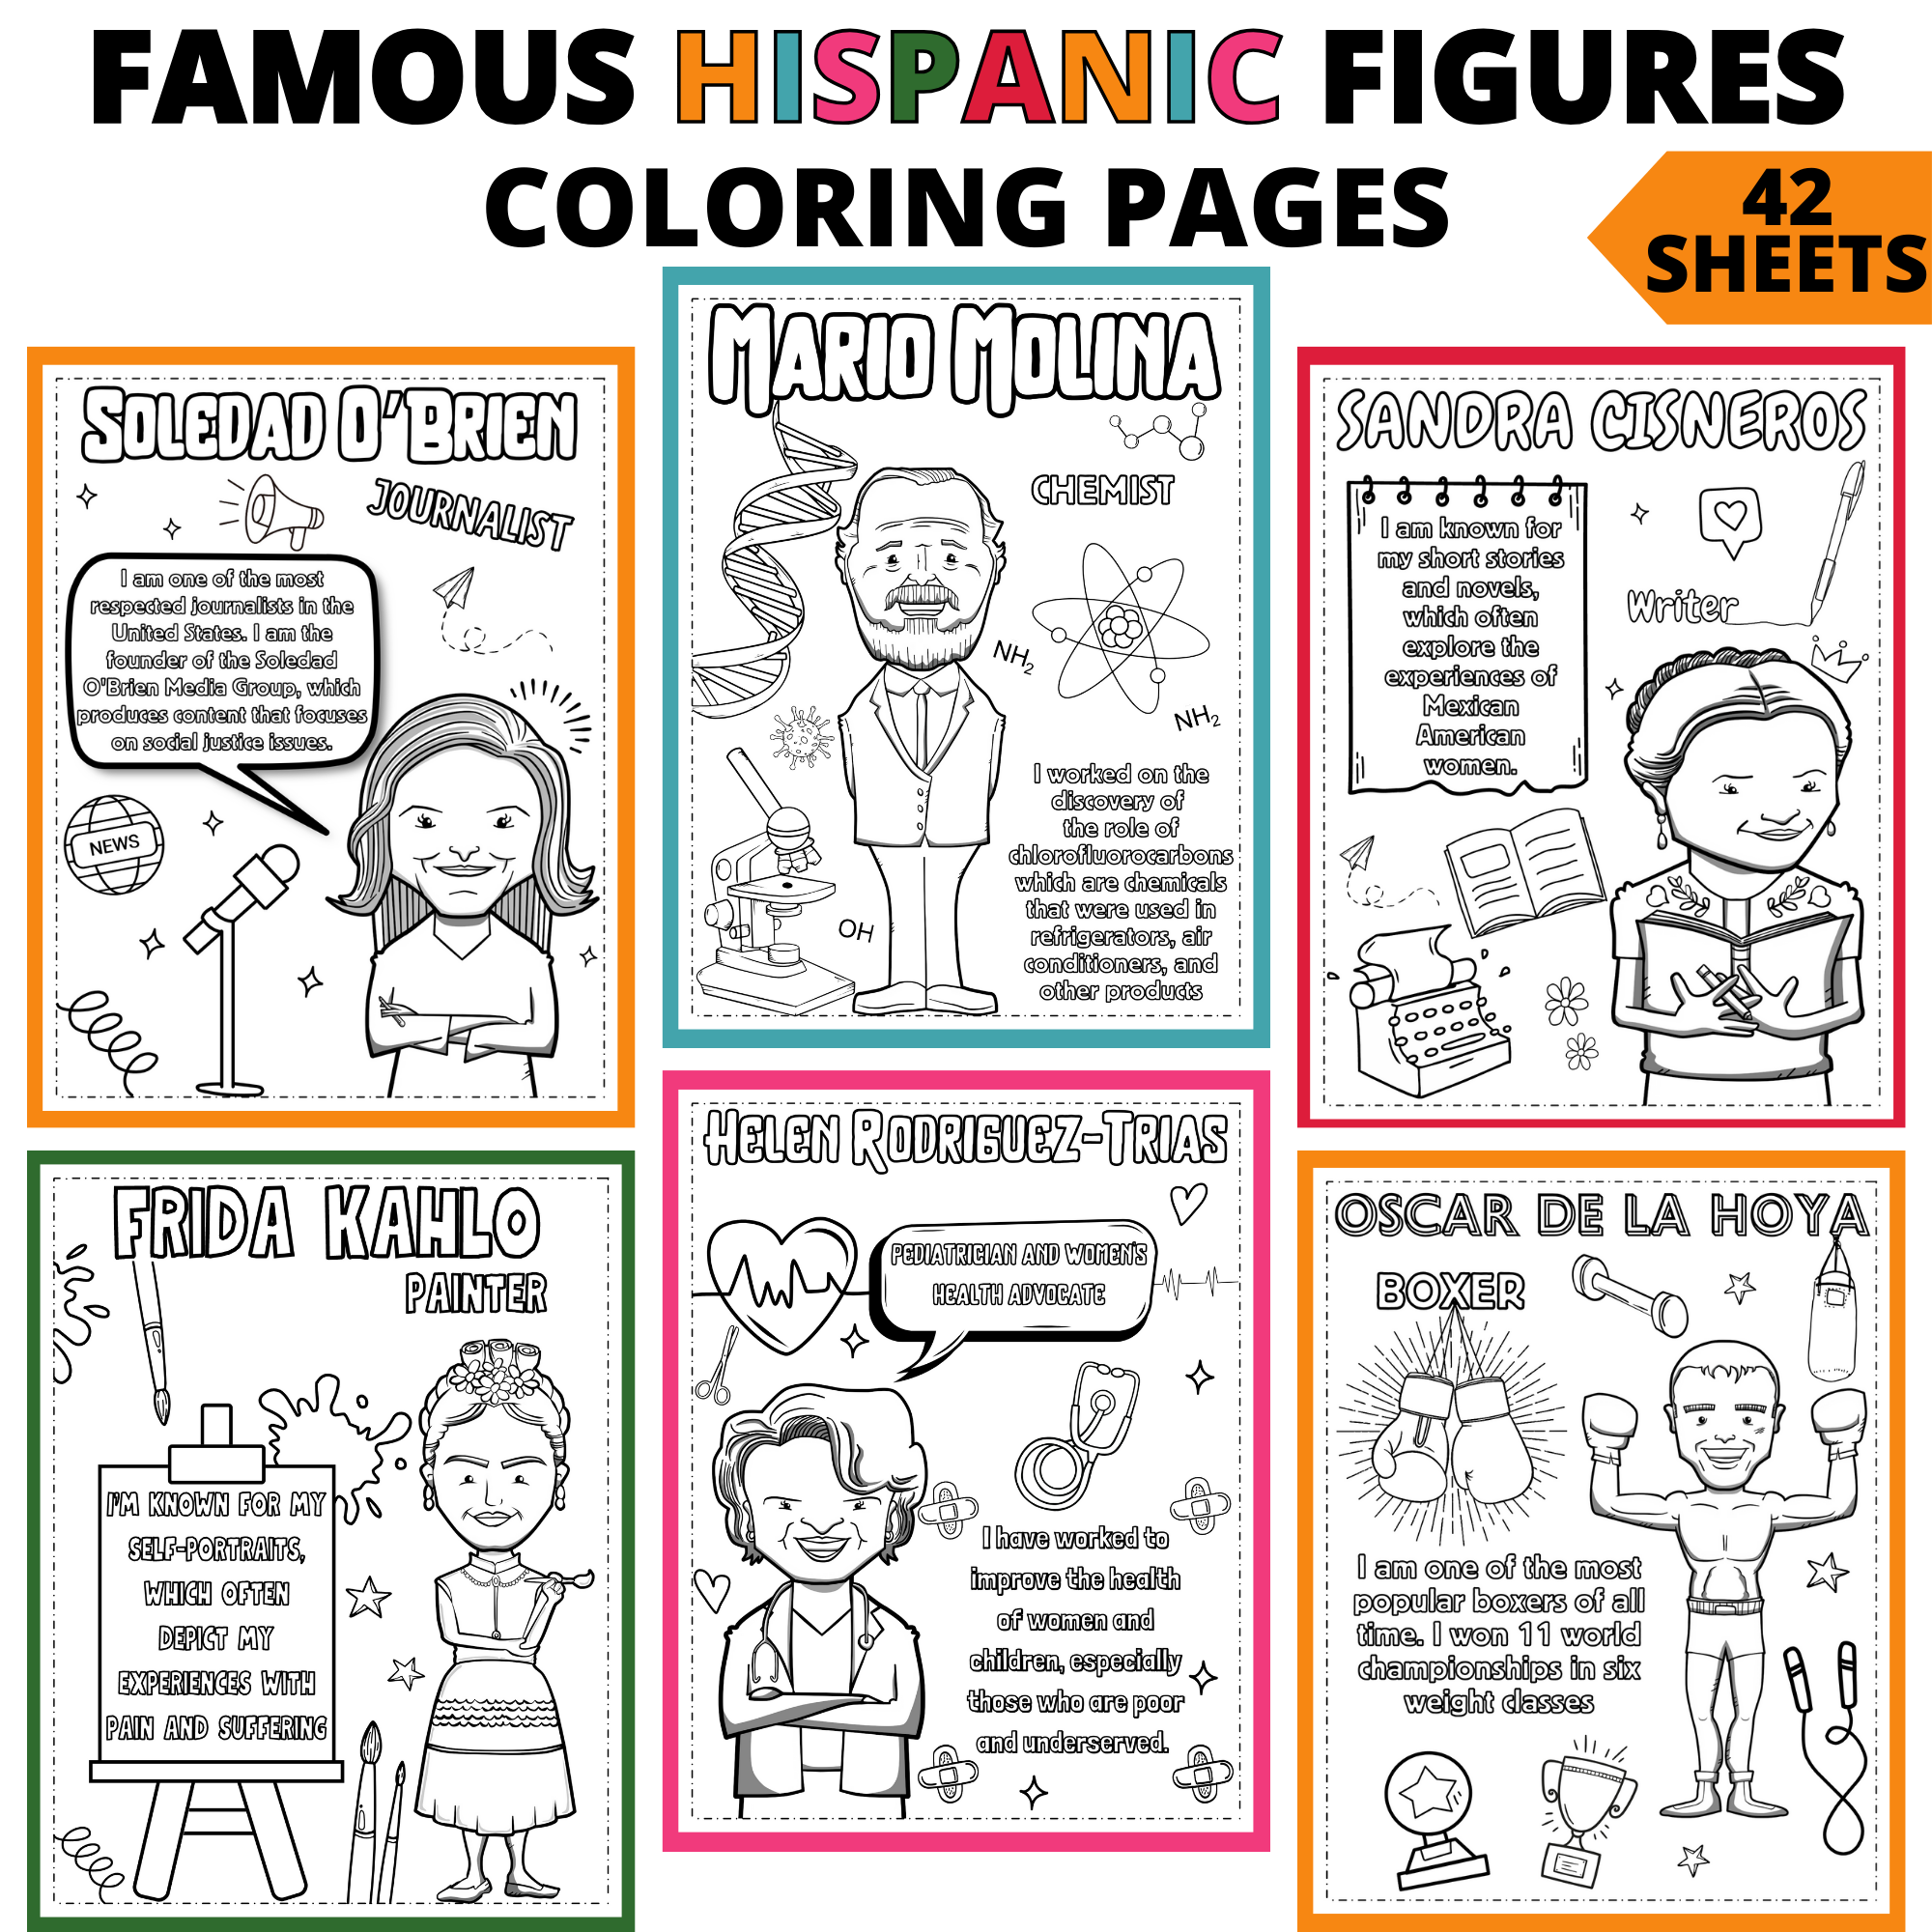 Hispanic heritage month coloring pages famous hispanic figures pages made by teachers